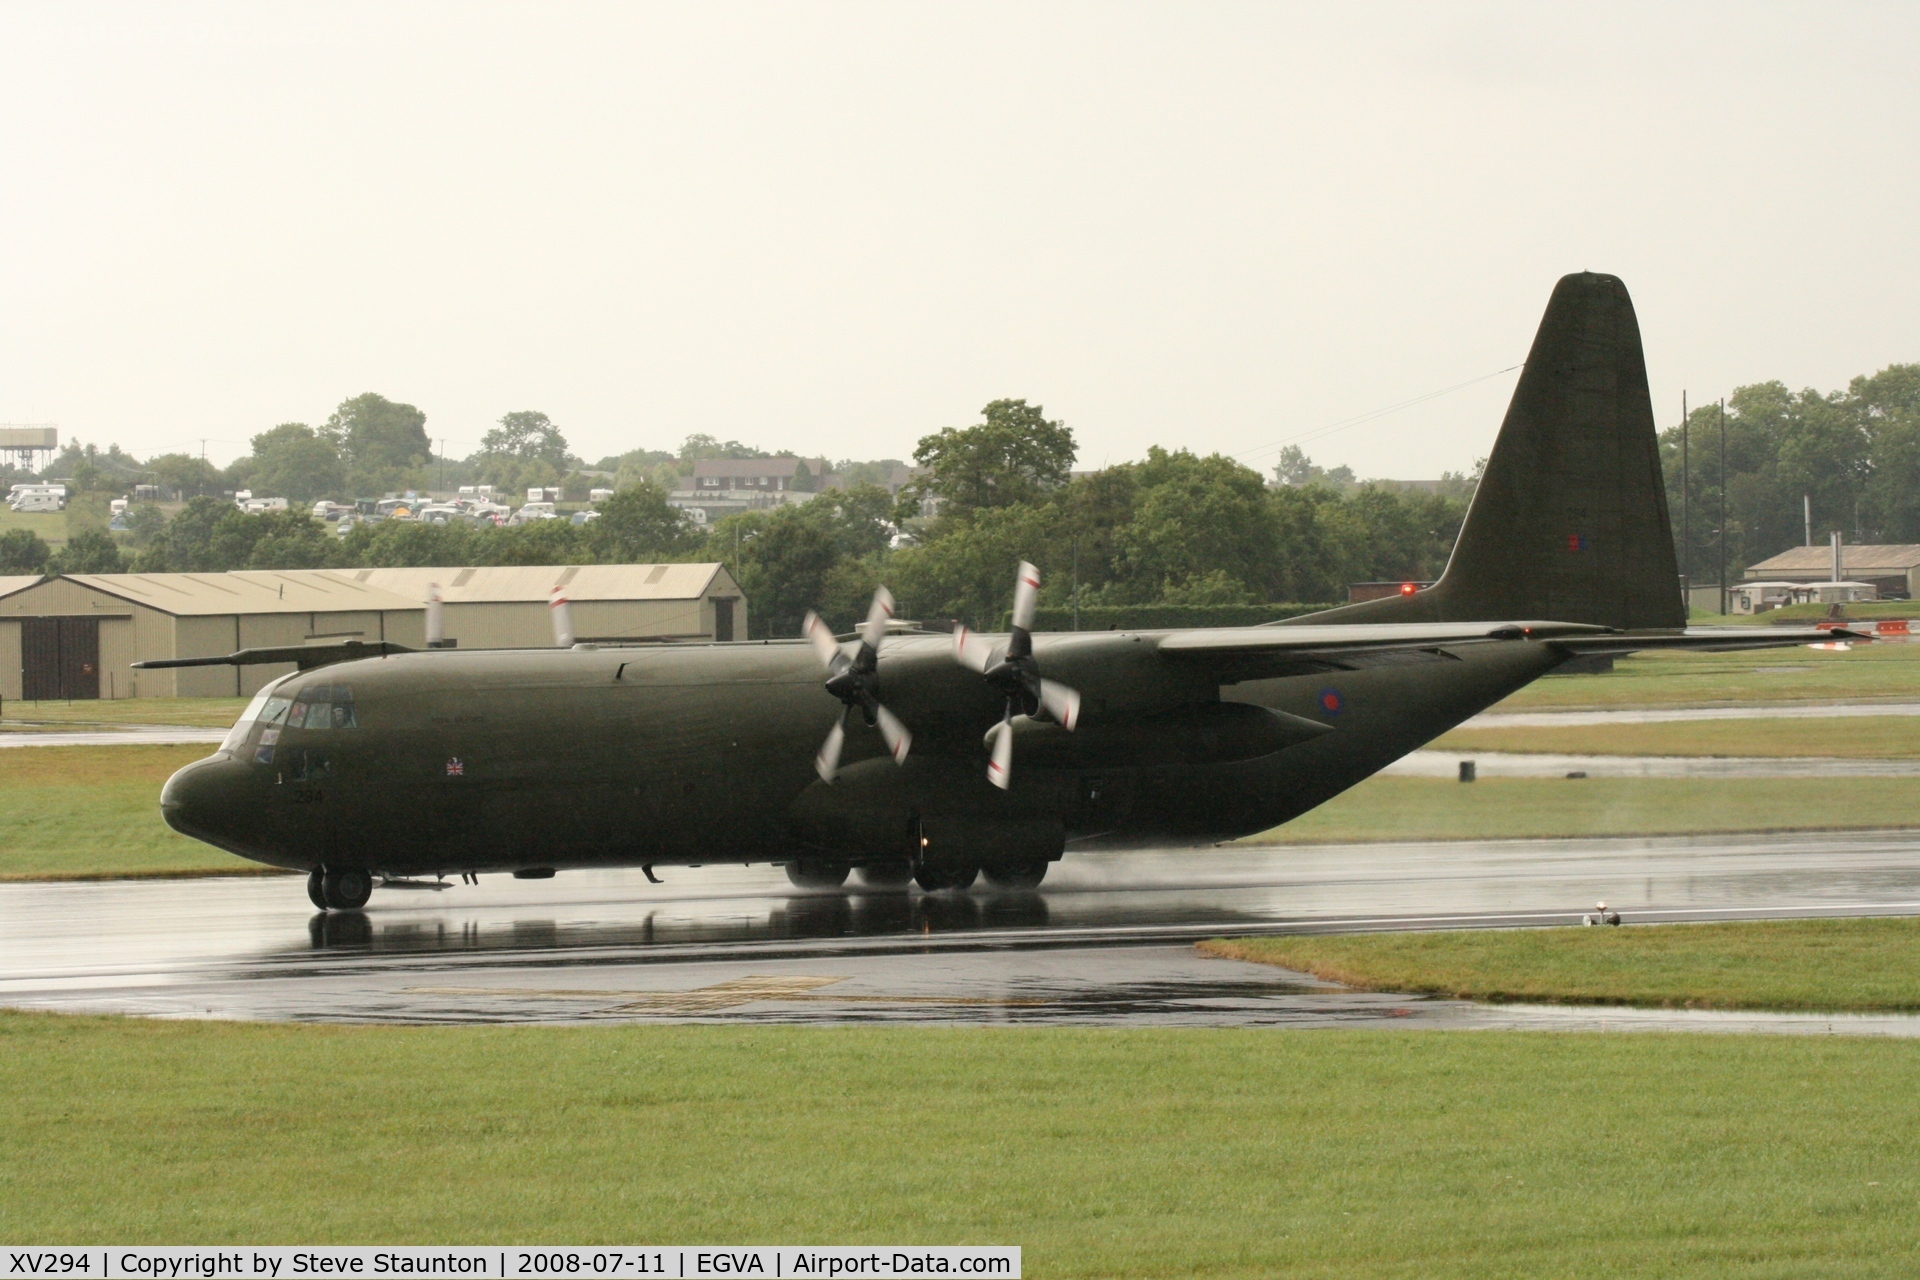 XV294, 1966 Lockheed C-130K Hercules C.3 C/N 382-4259, Taken at the Royal International Air Tattoo 2008 during arrivals and departures (show days cancelled due to bad weather)